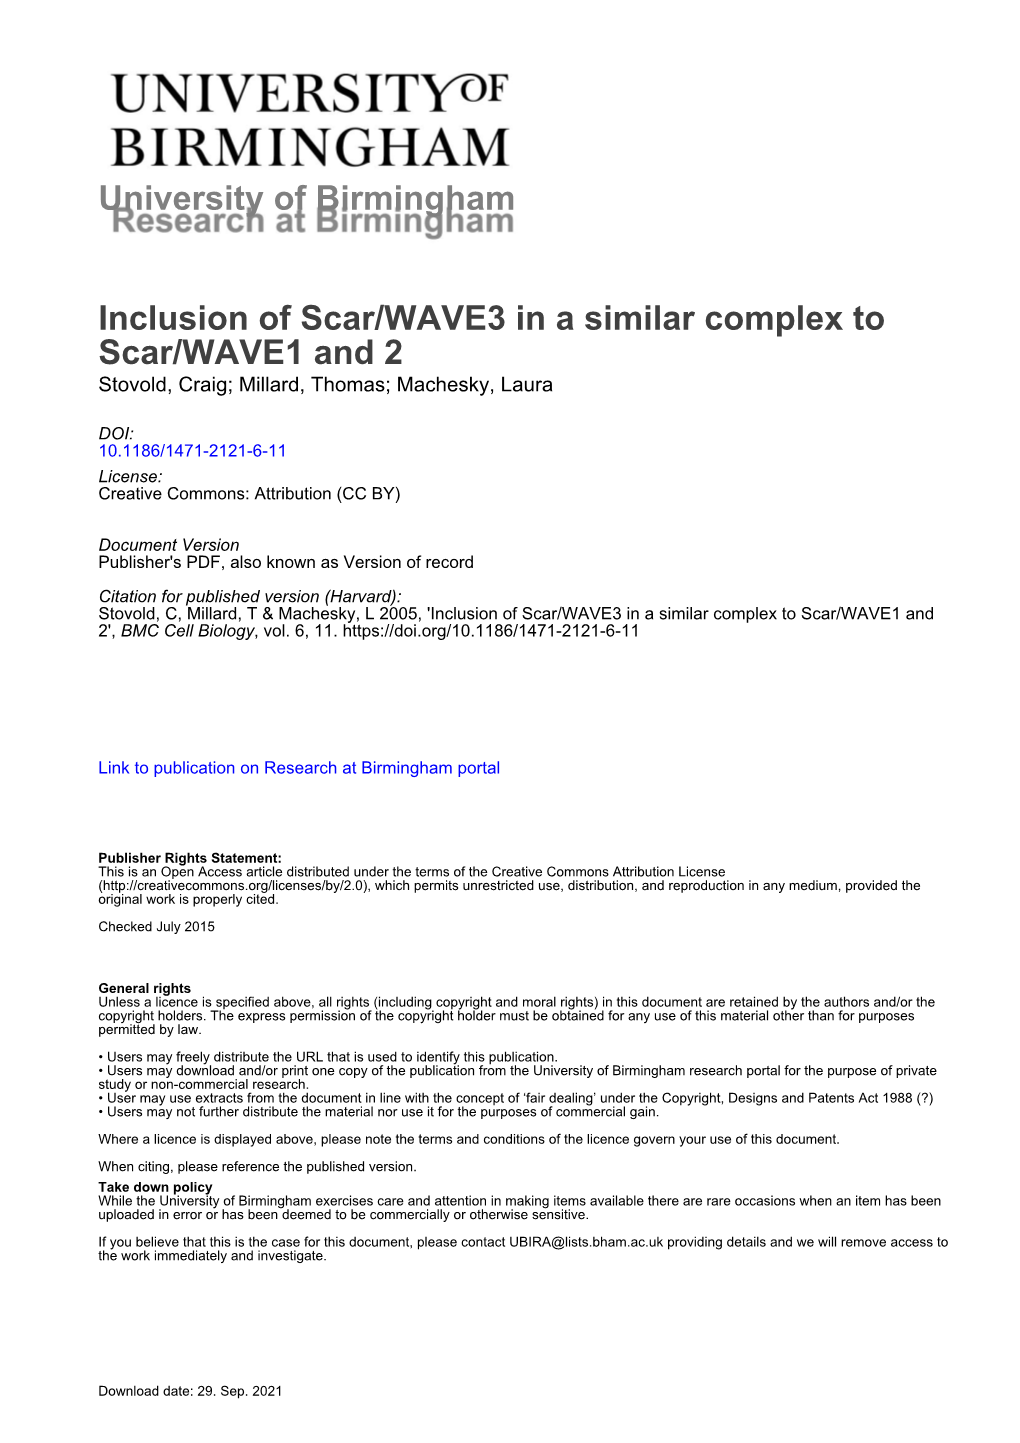 University of Birmingham Inclusion of Scar/WAVE3 in a Similar